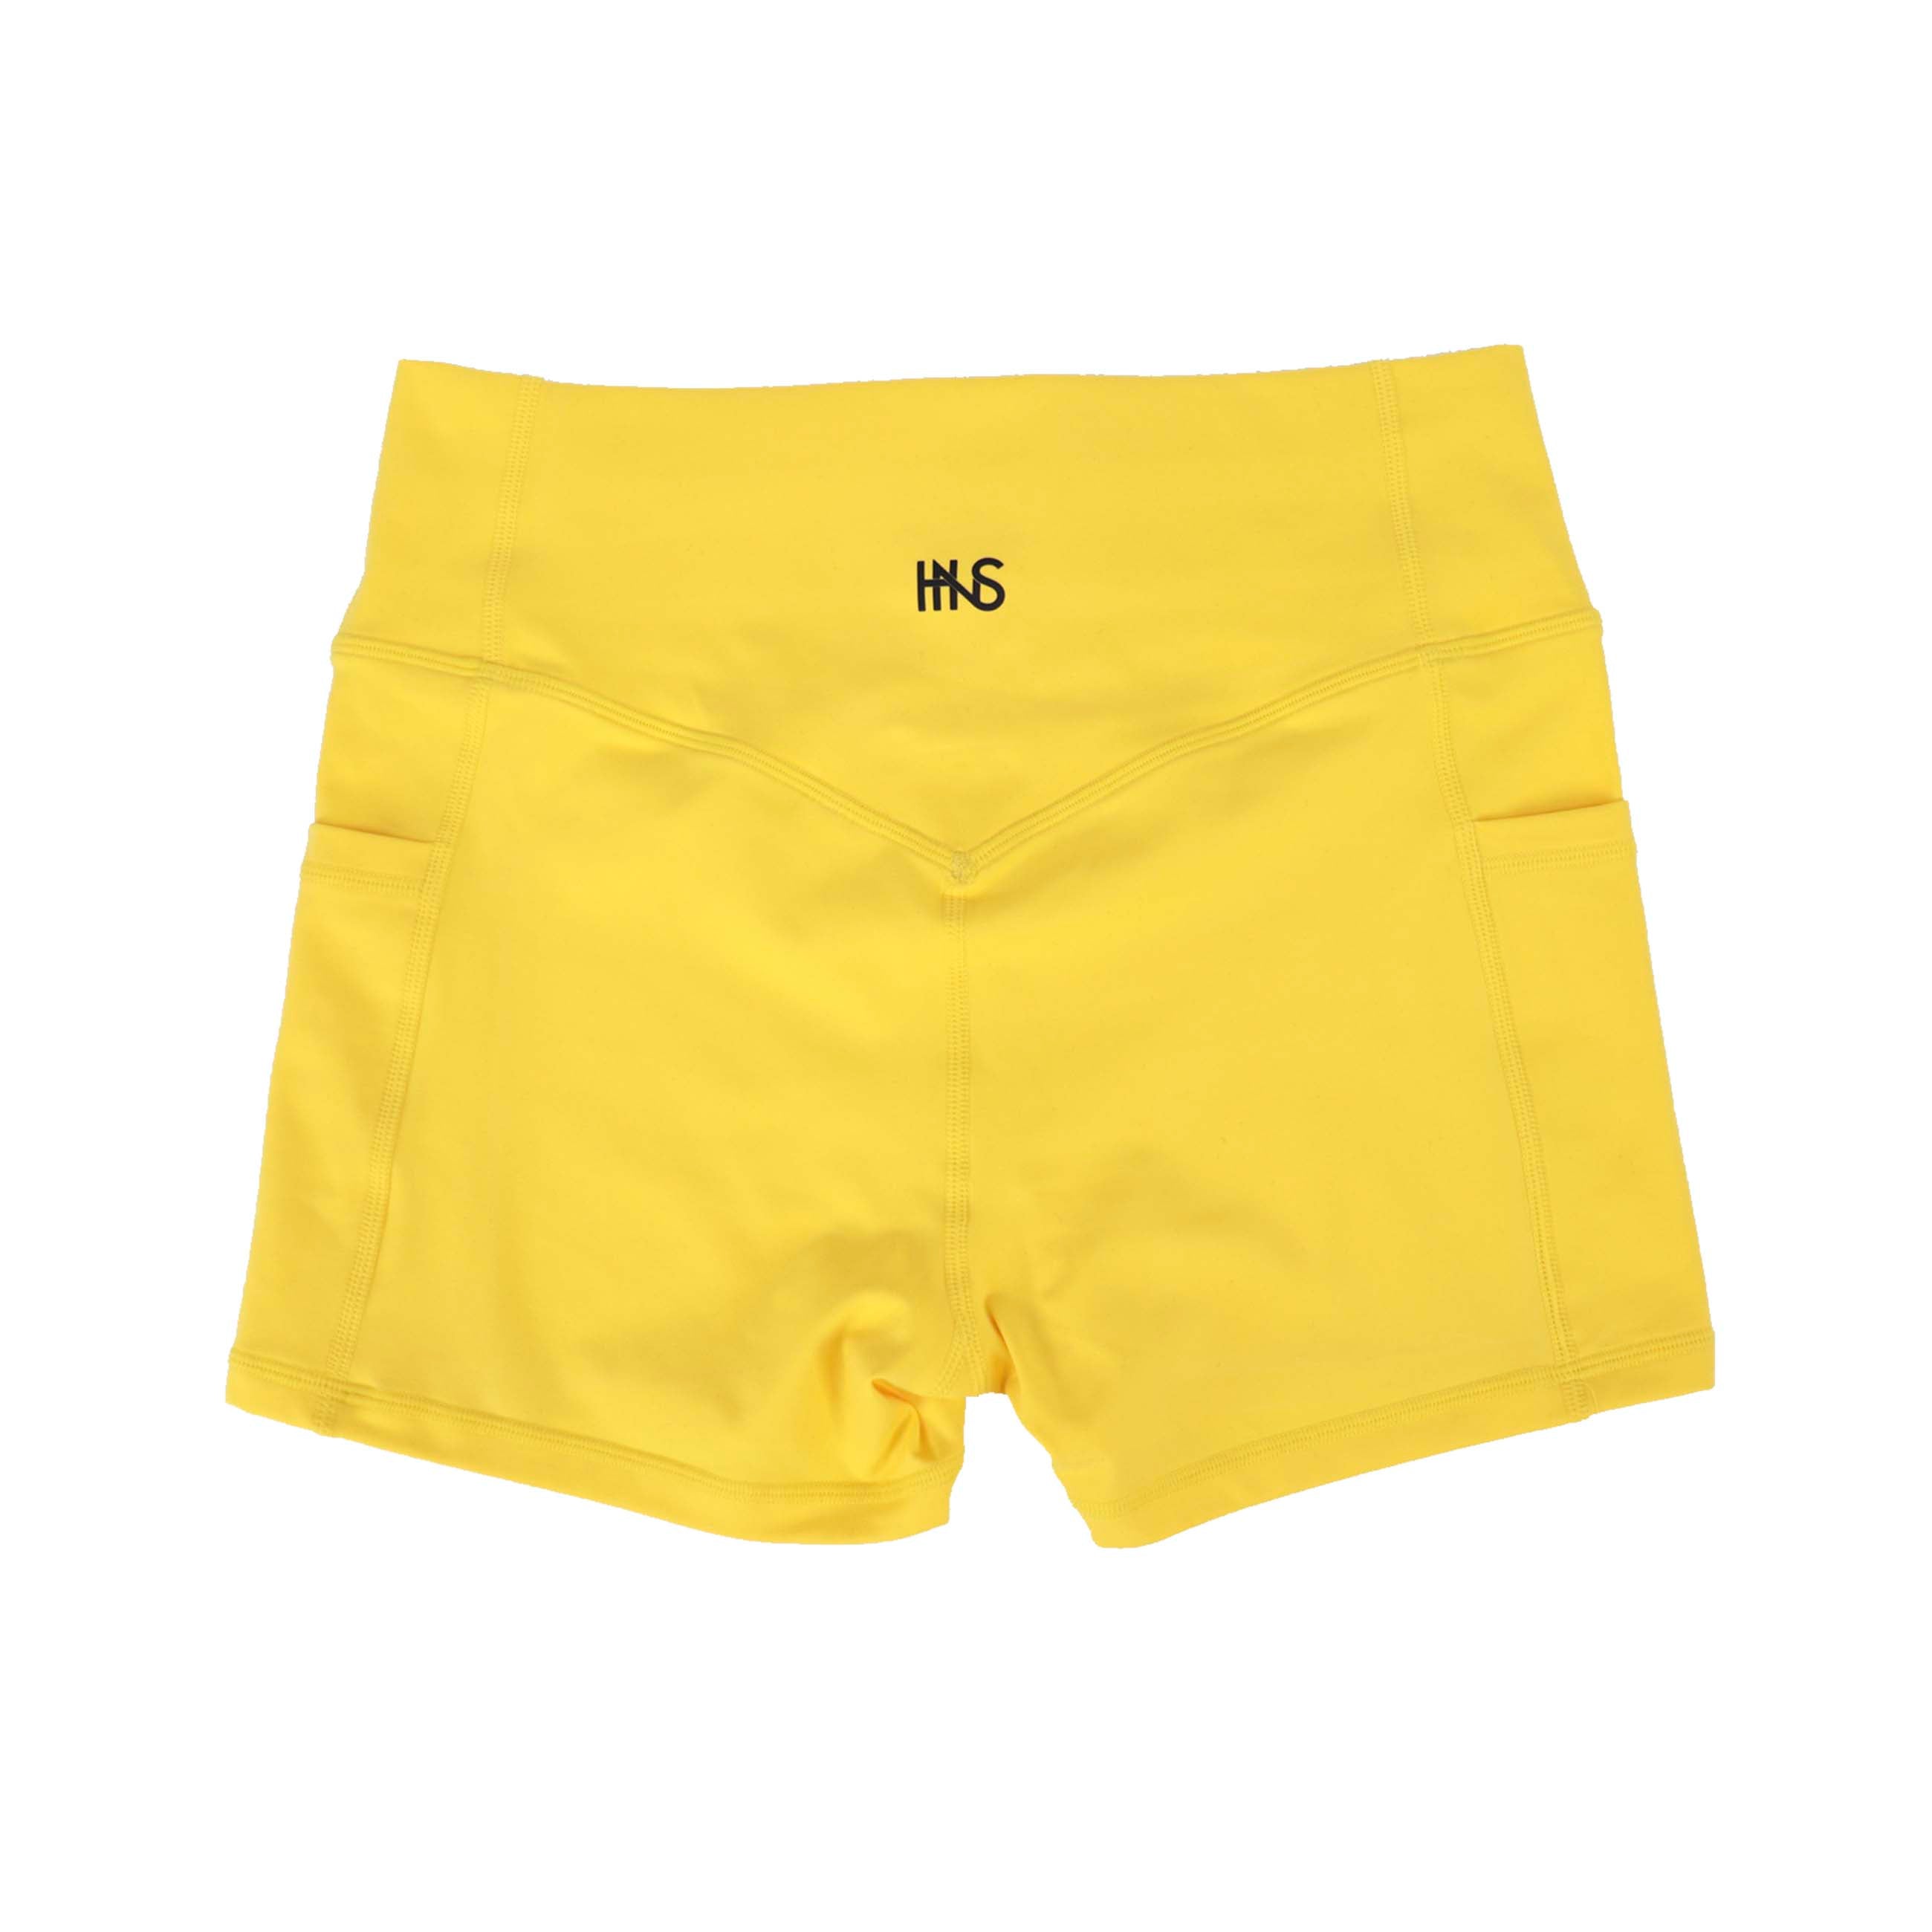 Yellow Athletic Shorts - H.N.S Apparel